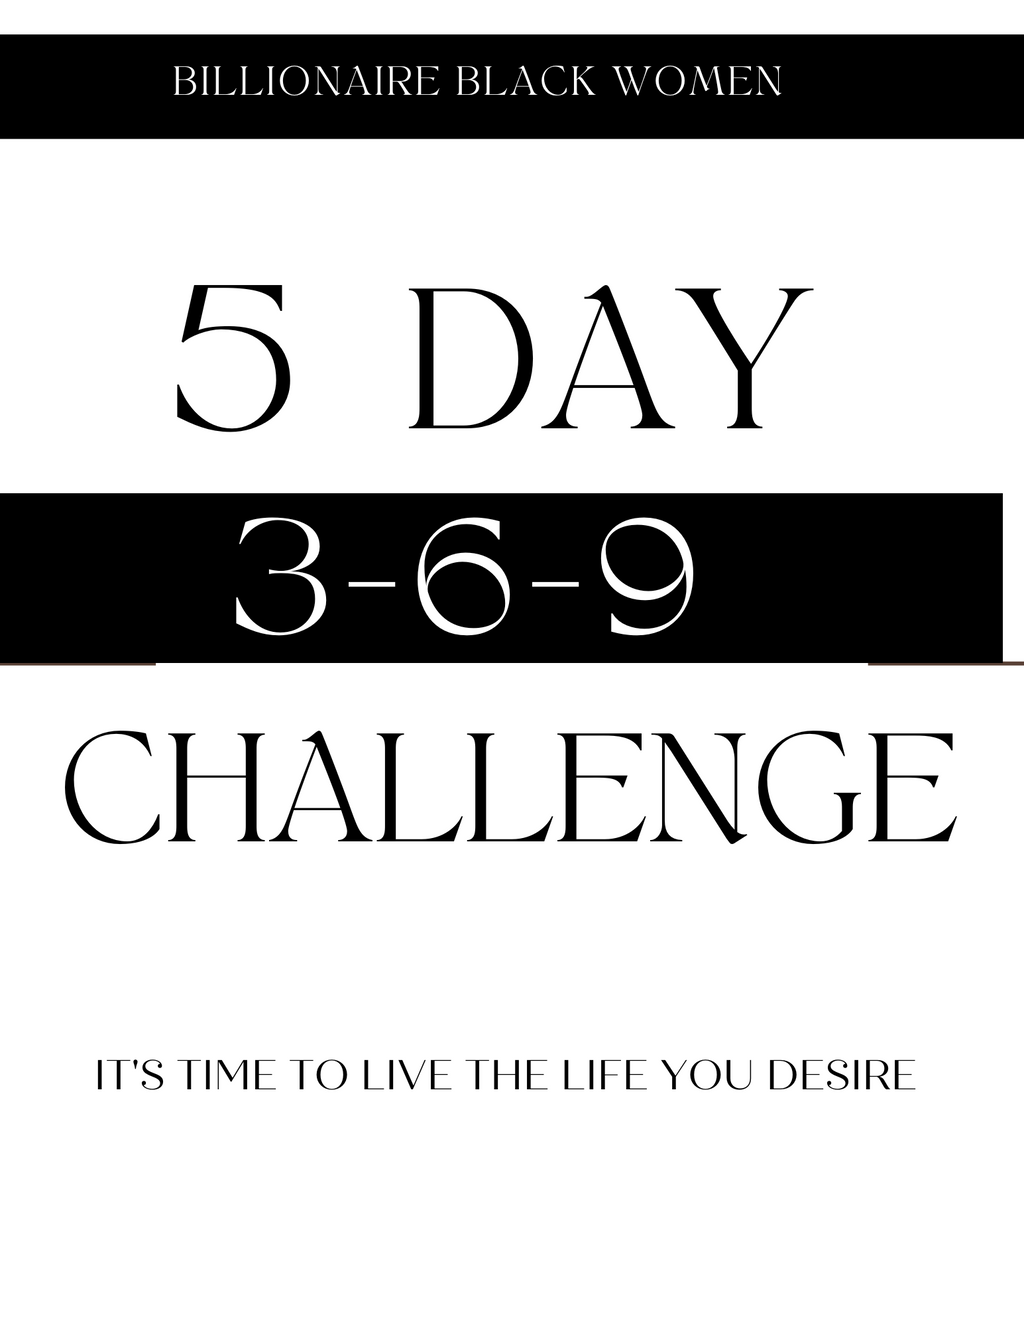 3-6-9 FIVE DAY CHALLENGE